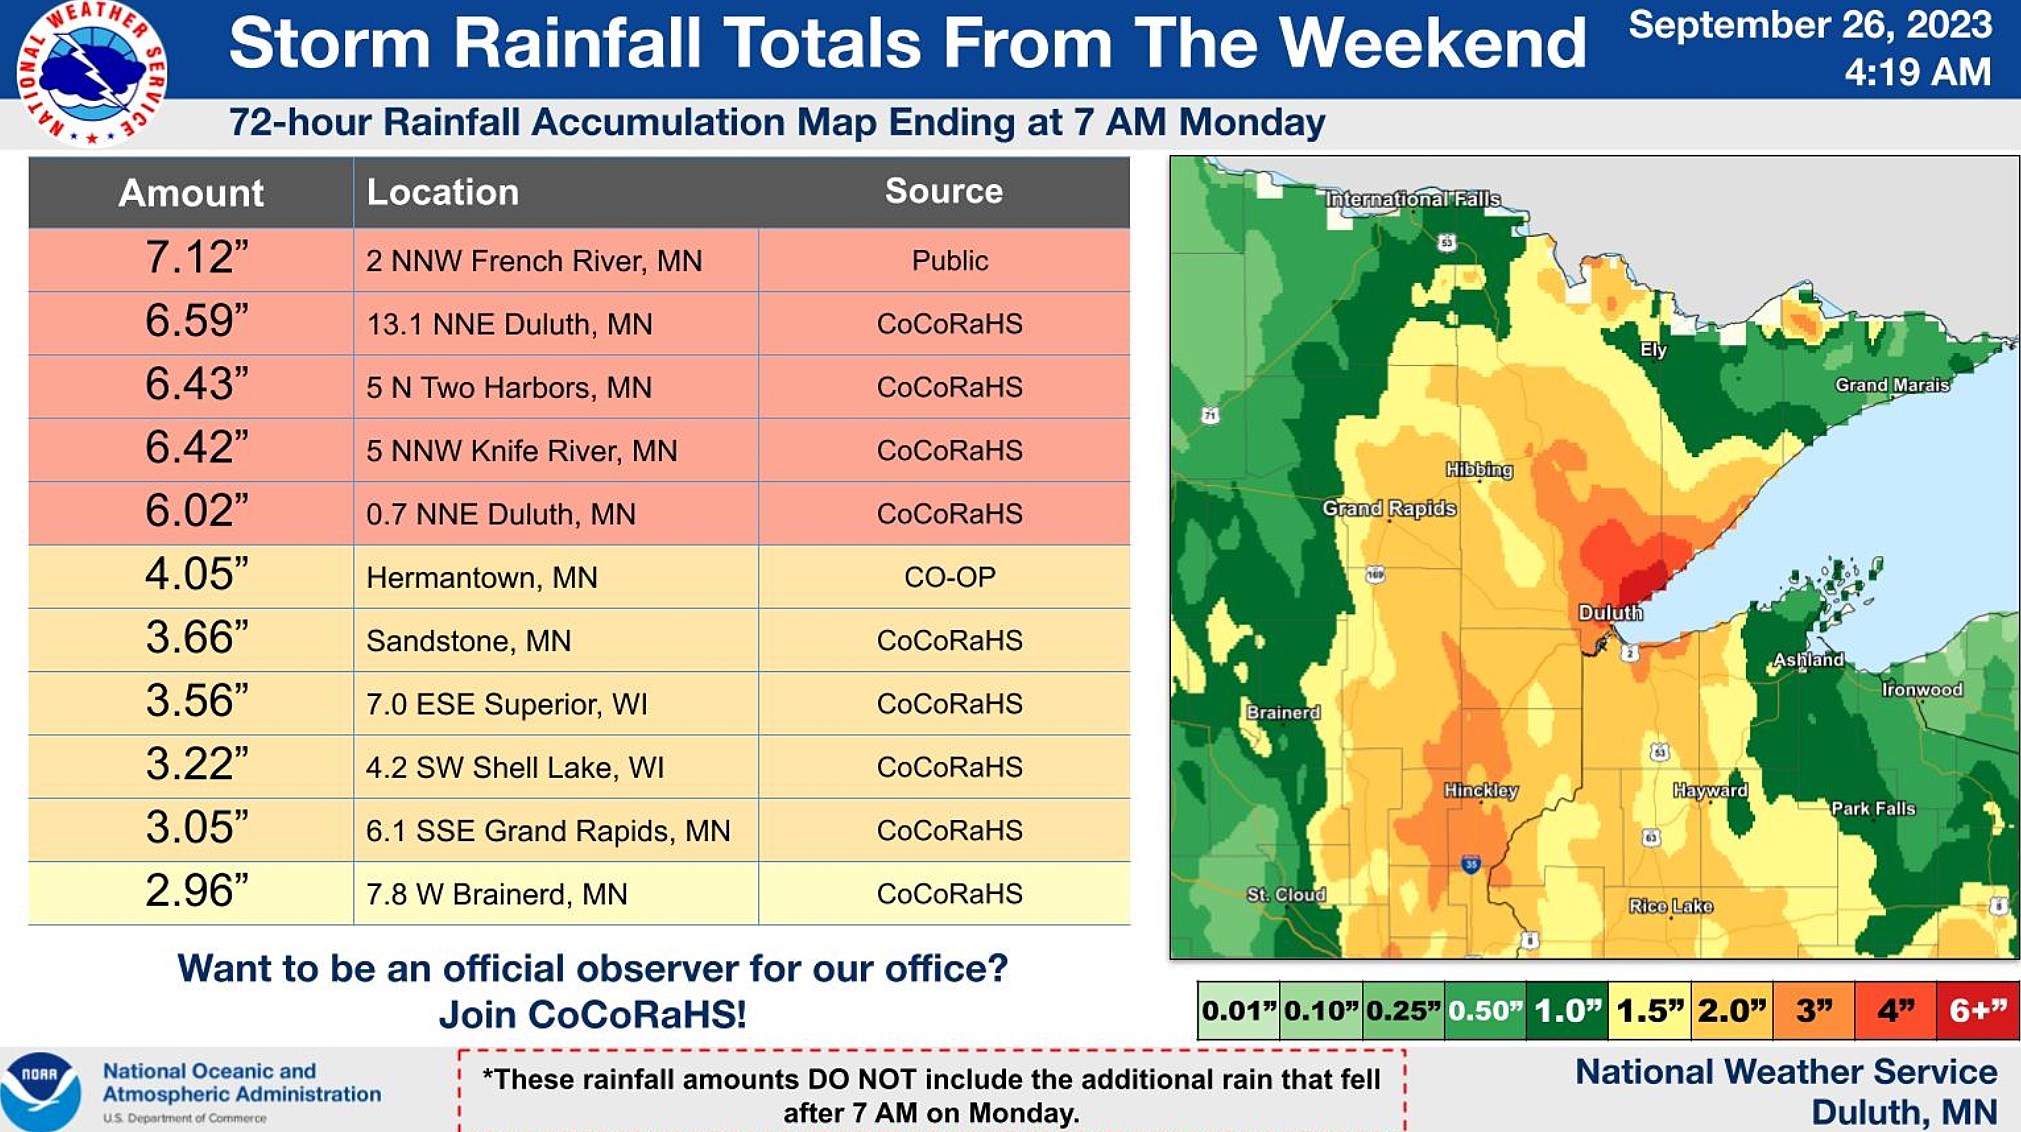 Holy Buckets (of rain). Credit: Duluth National Weather Service